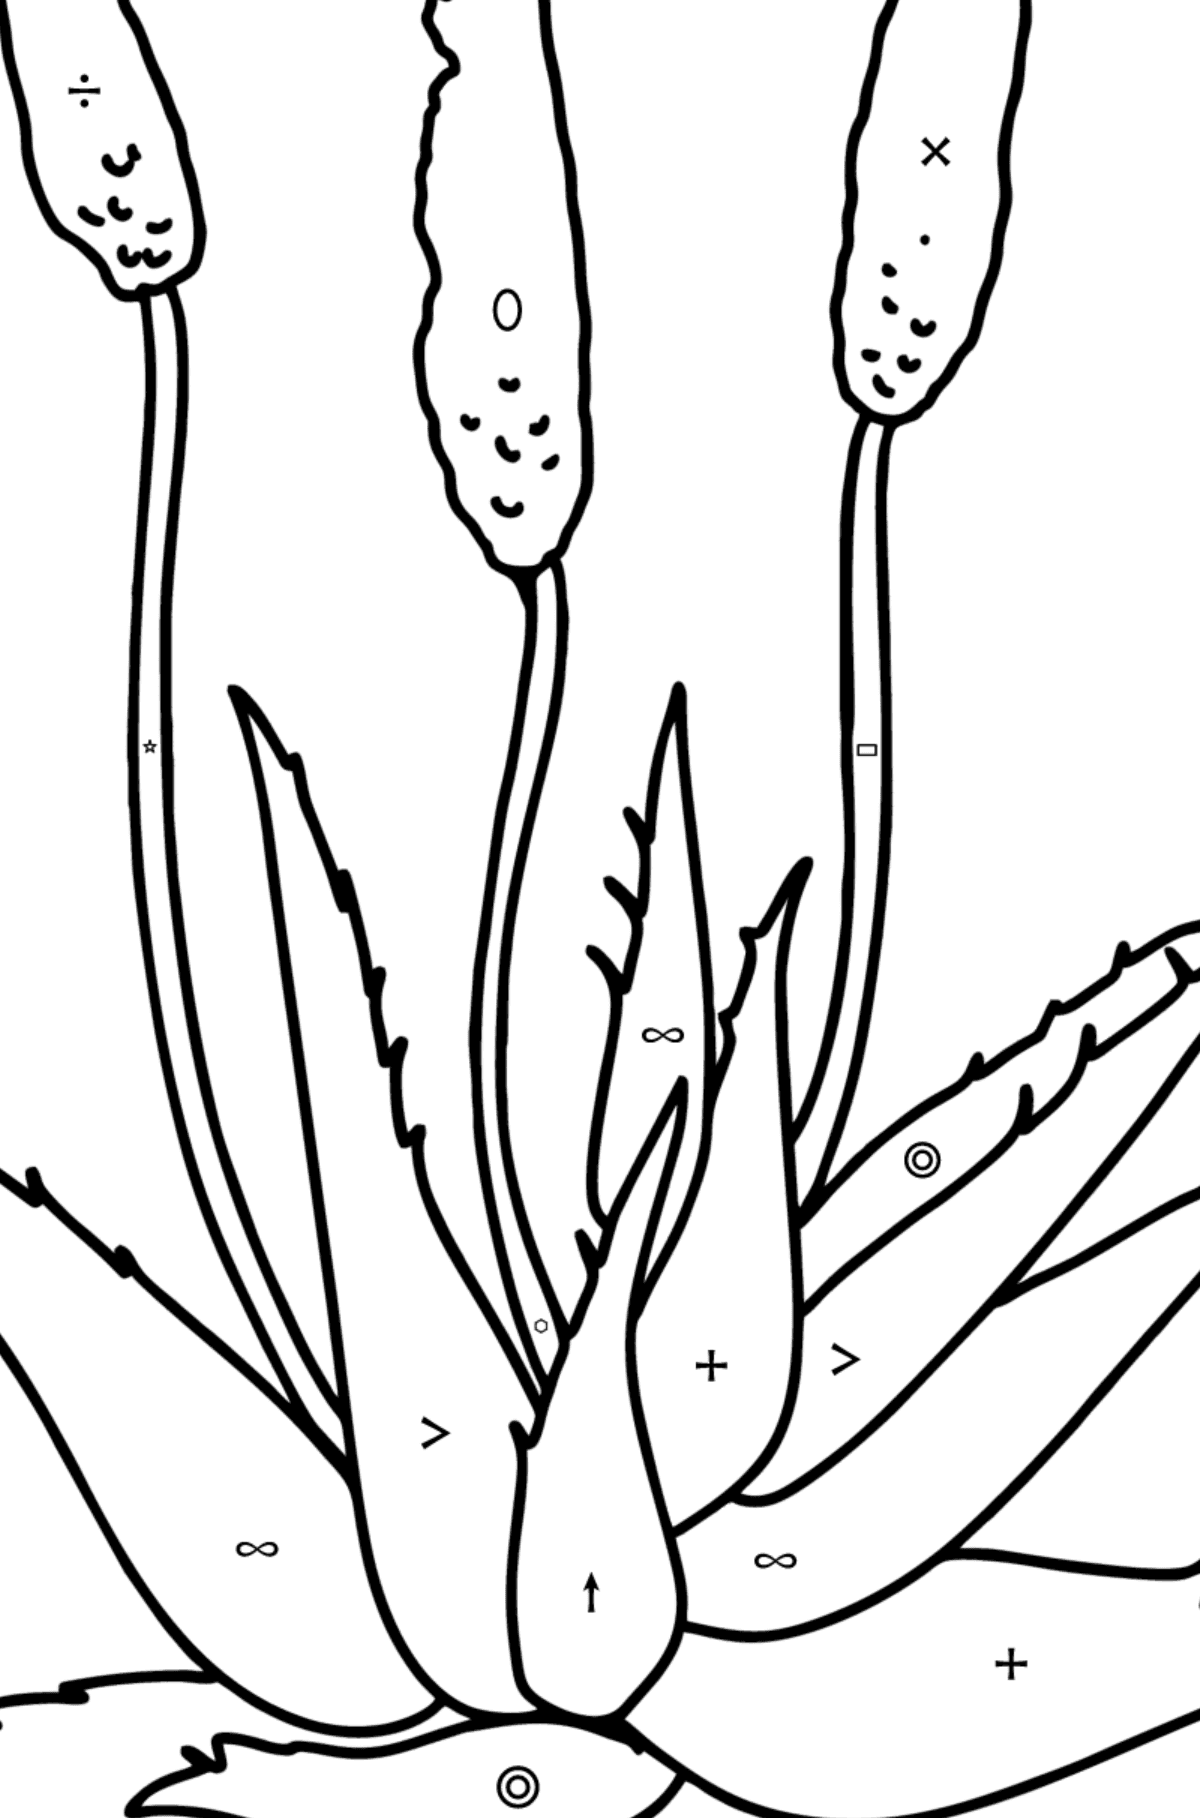 Aloe coloring page - Coloring by Symbols and Geometric Shapes for Kids